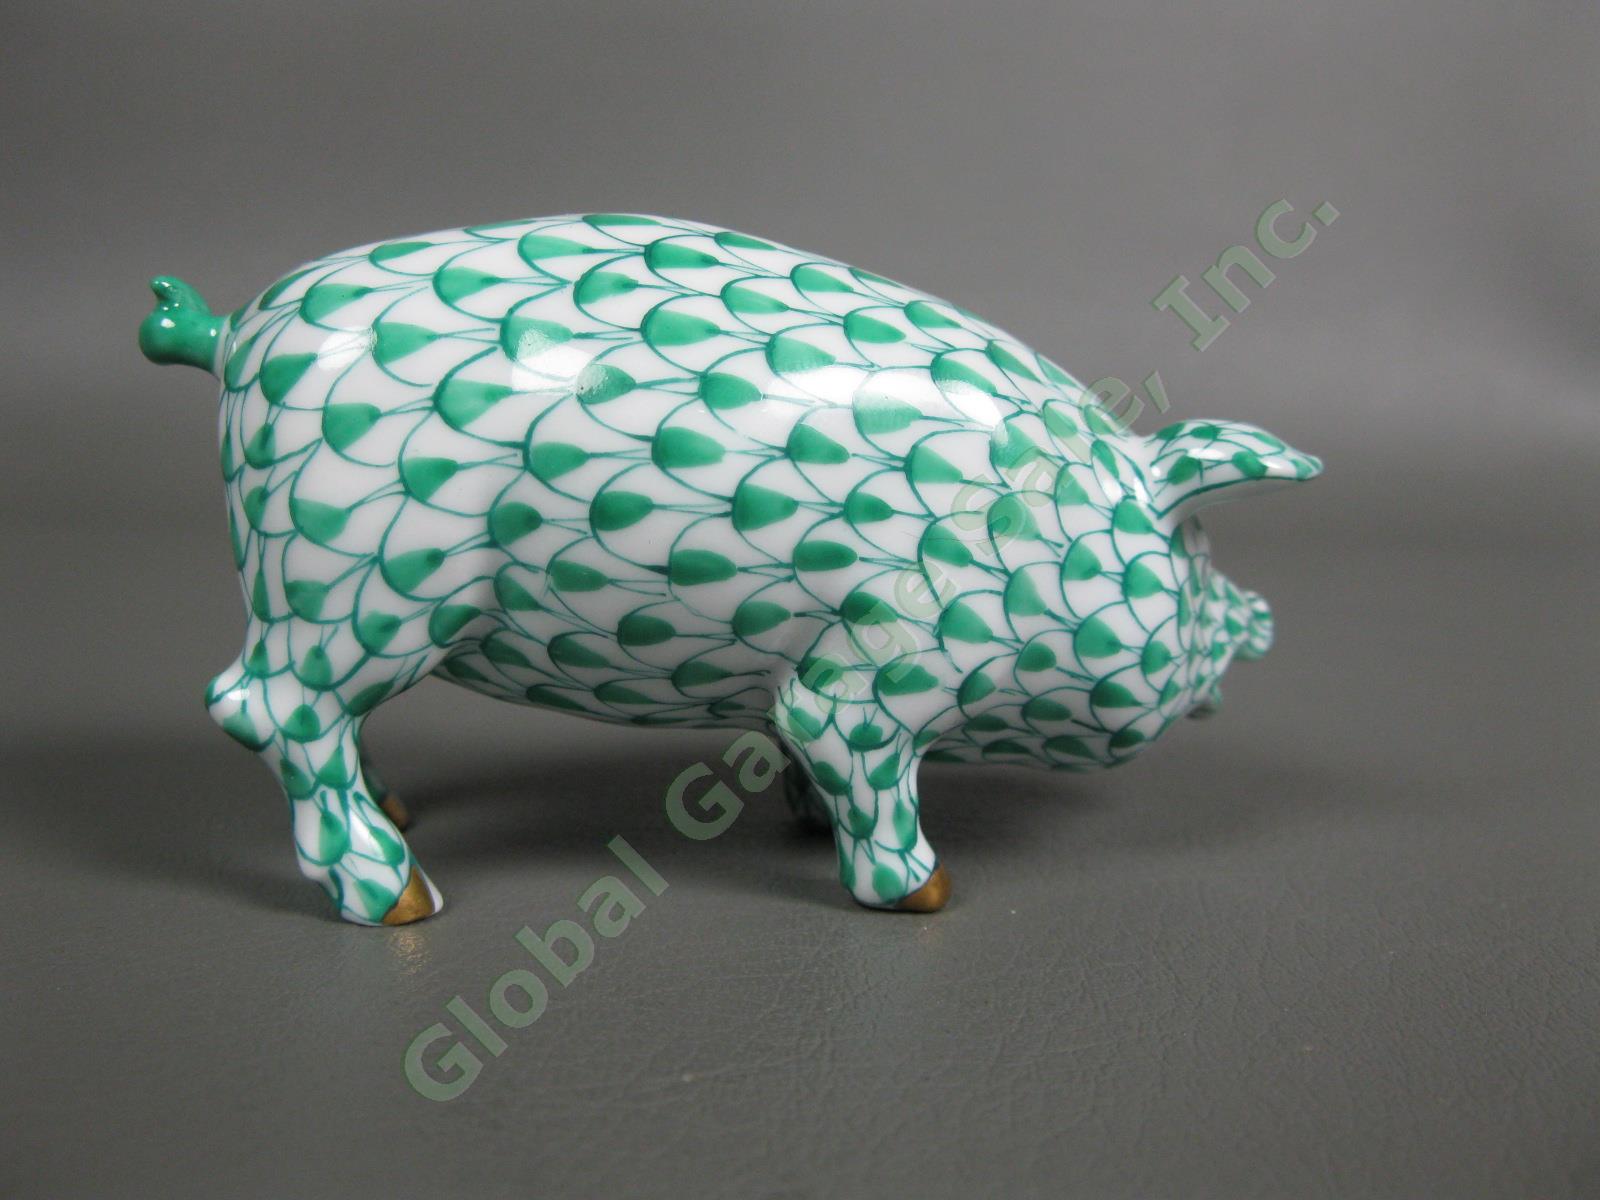 Herend Open Mouth Green Fishnet Pig 24k Gold Accents 15301 Farmyard Figurine NR 2